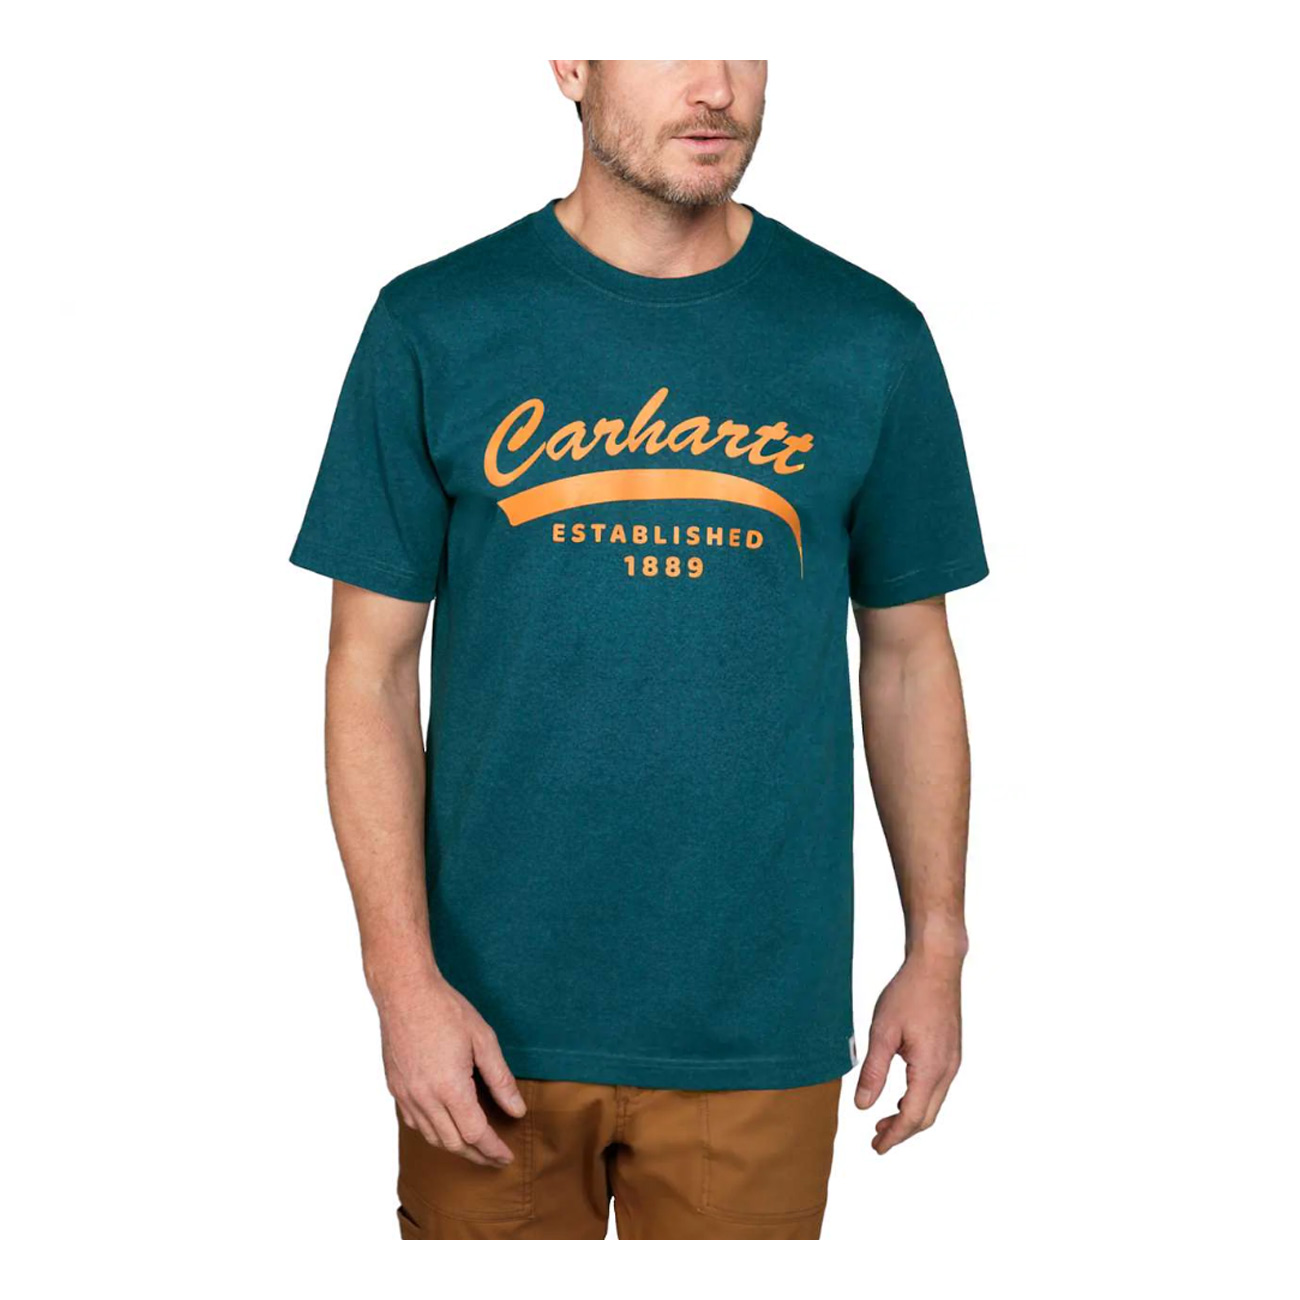 Carhartt Relaxed Fit Heavyweight S/S Graphic T-Shirt blau